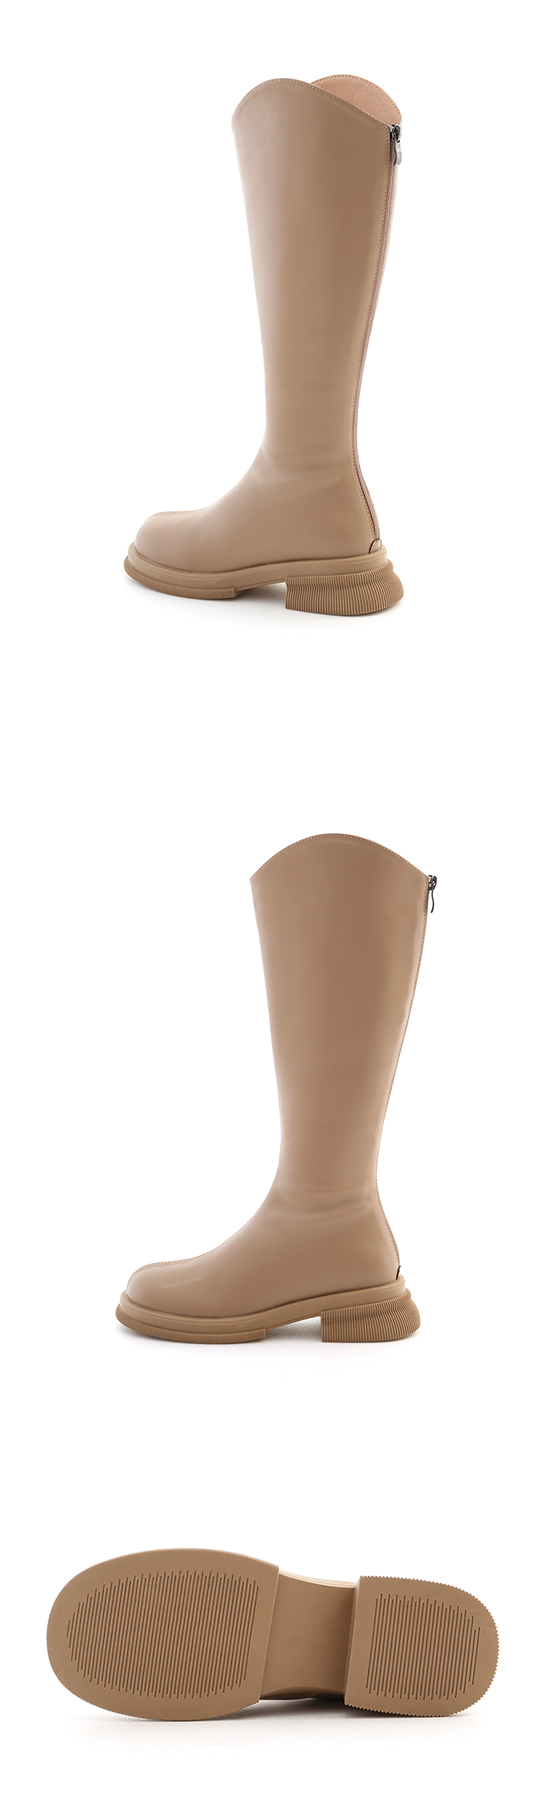 V-cut Under-The-Knee Boots Beige